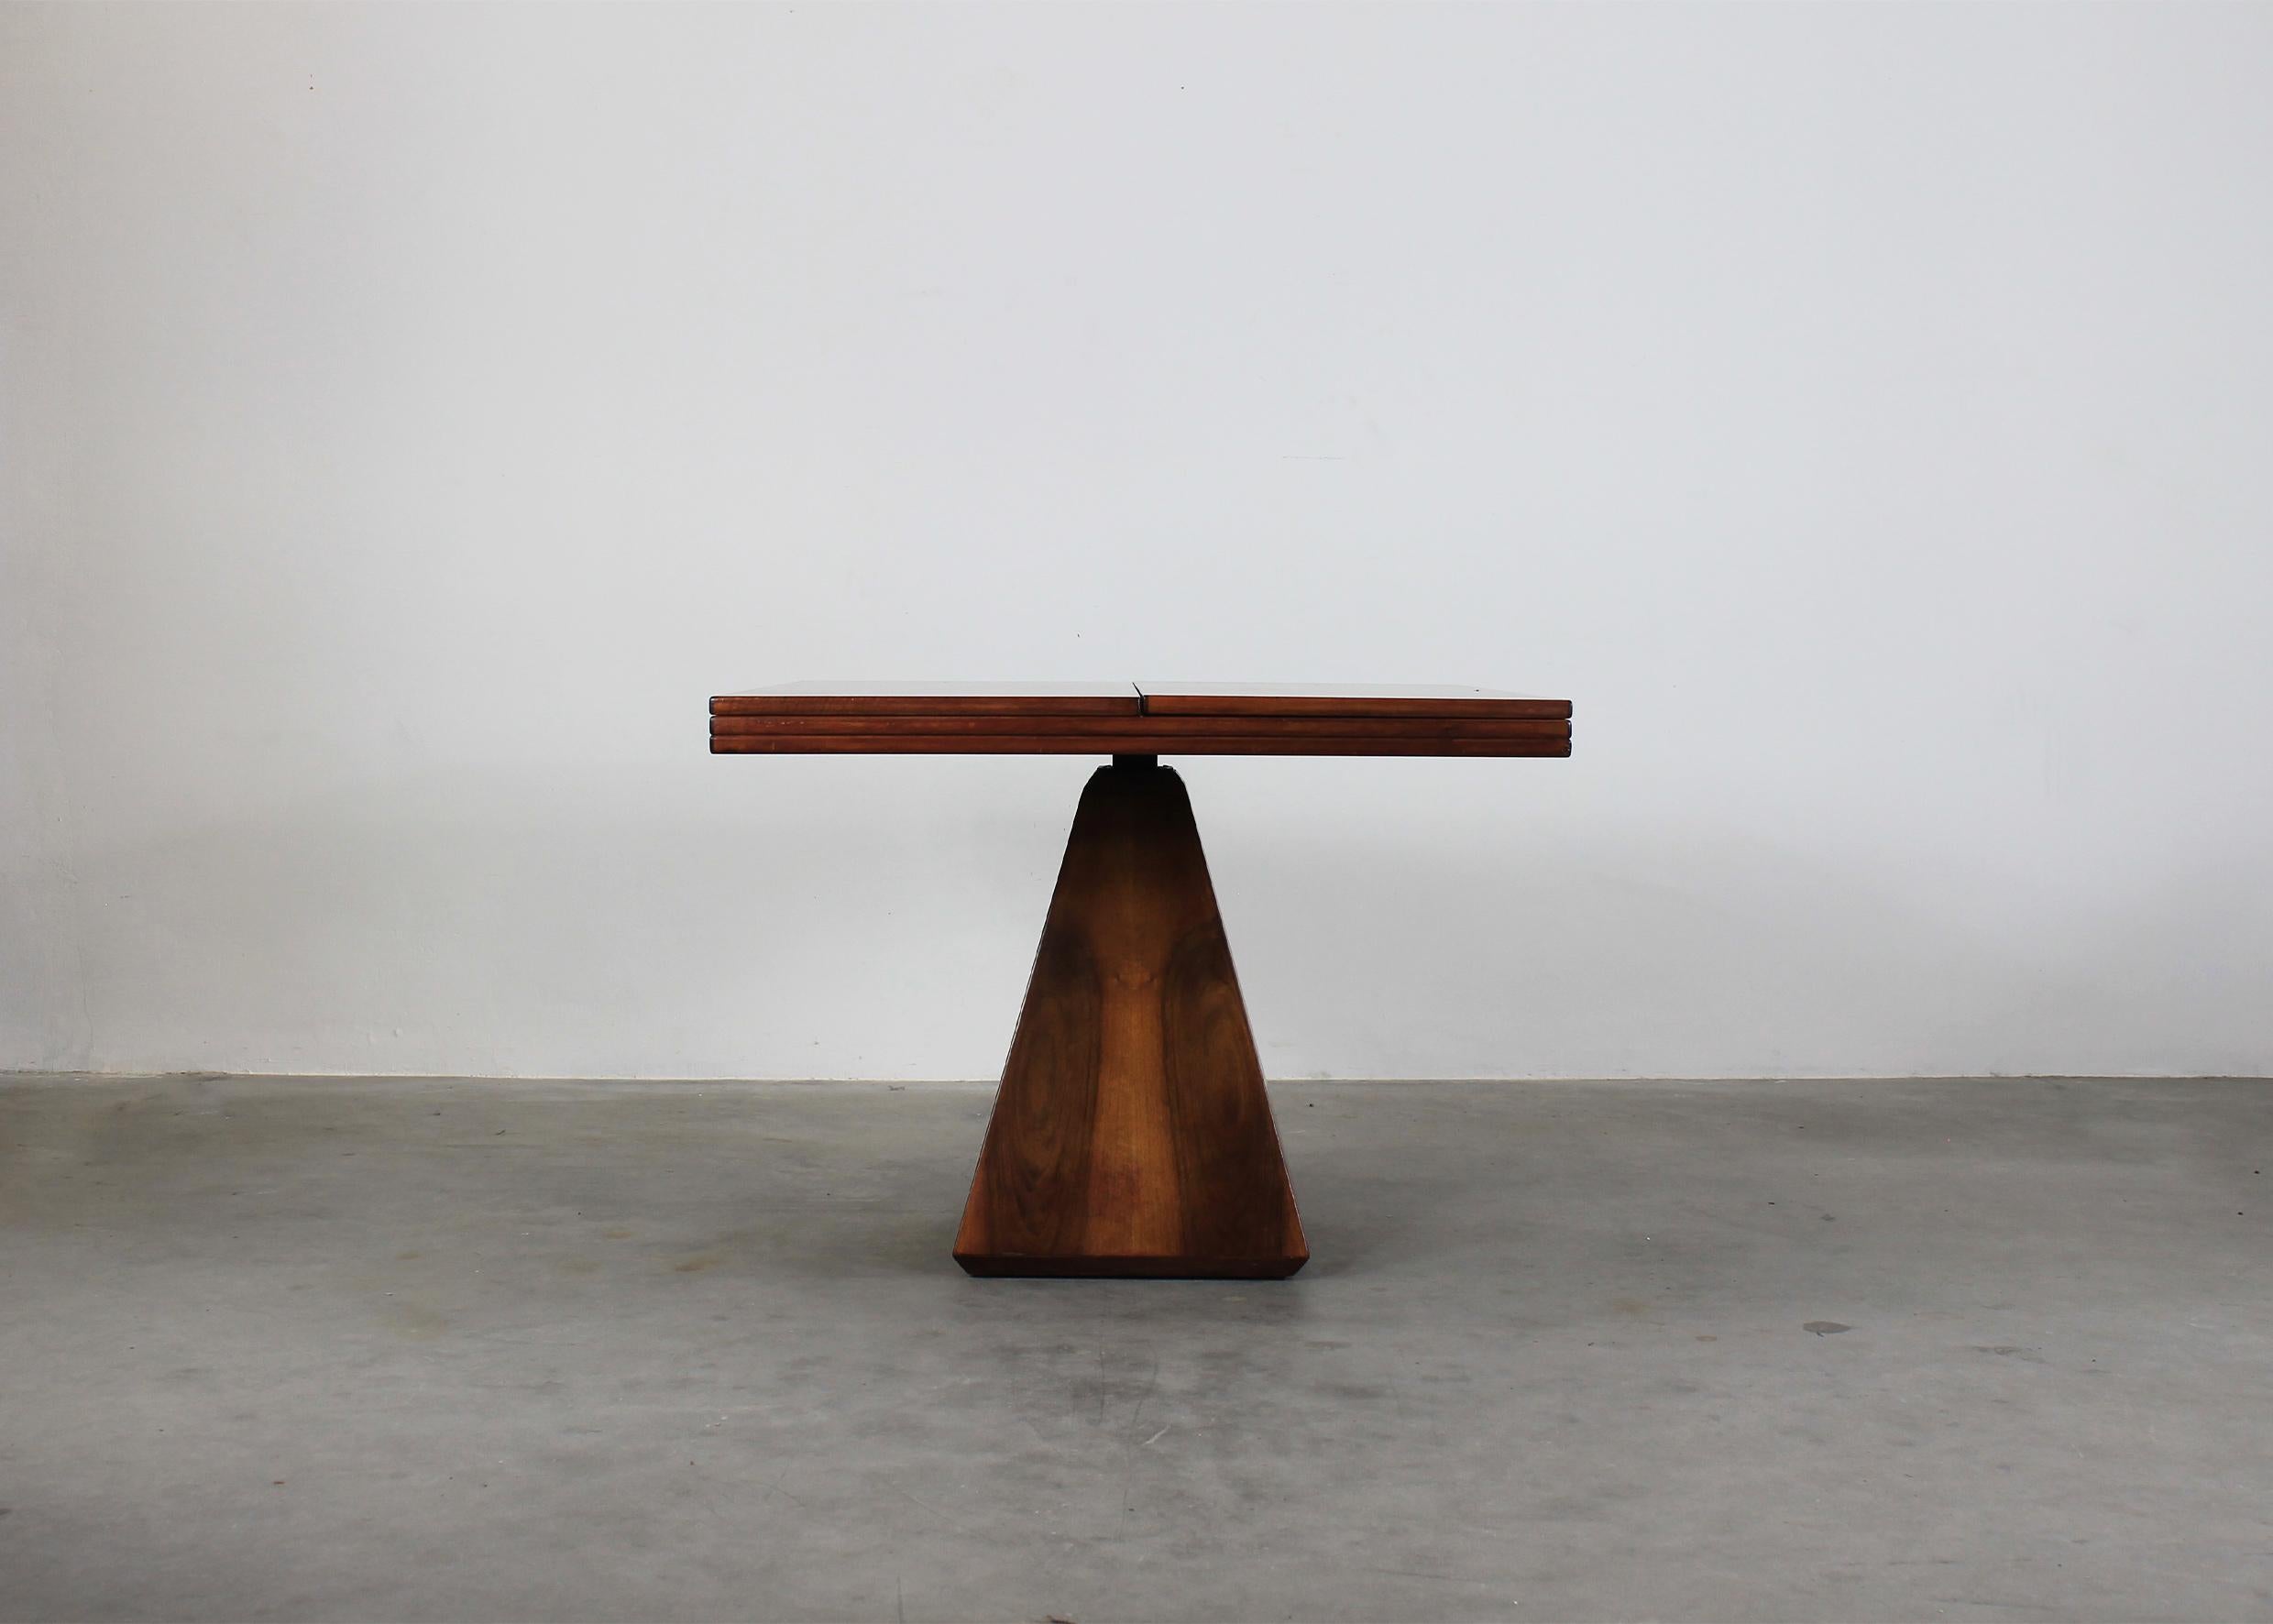 Extendable Chelsea dining table with a square tabletop and a pyramidal base entirely made in walnut wood and metal details. 

It was designed by Vittorio Introini and produced by Saporiti during the 1960s.

The tabletop can be opened up and